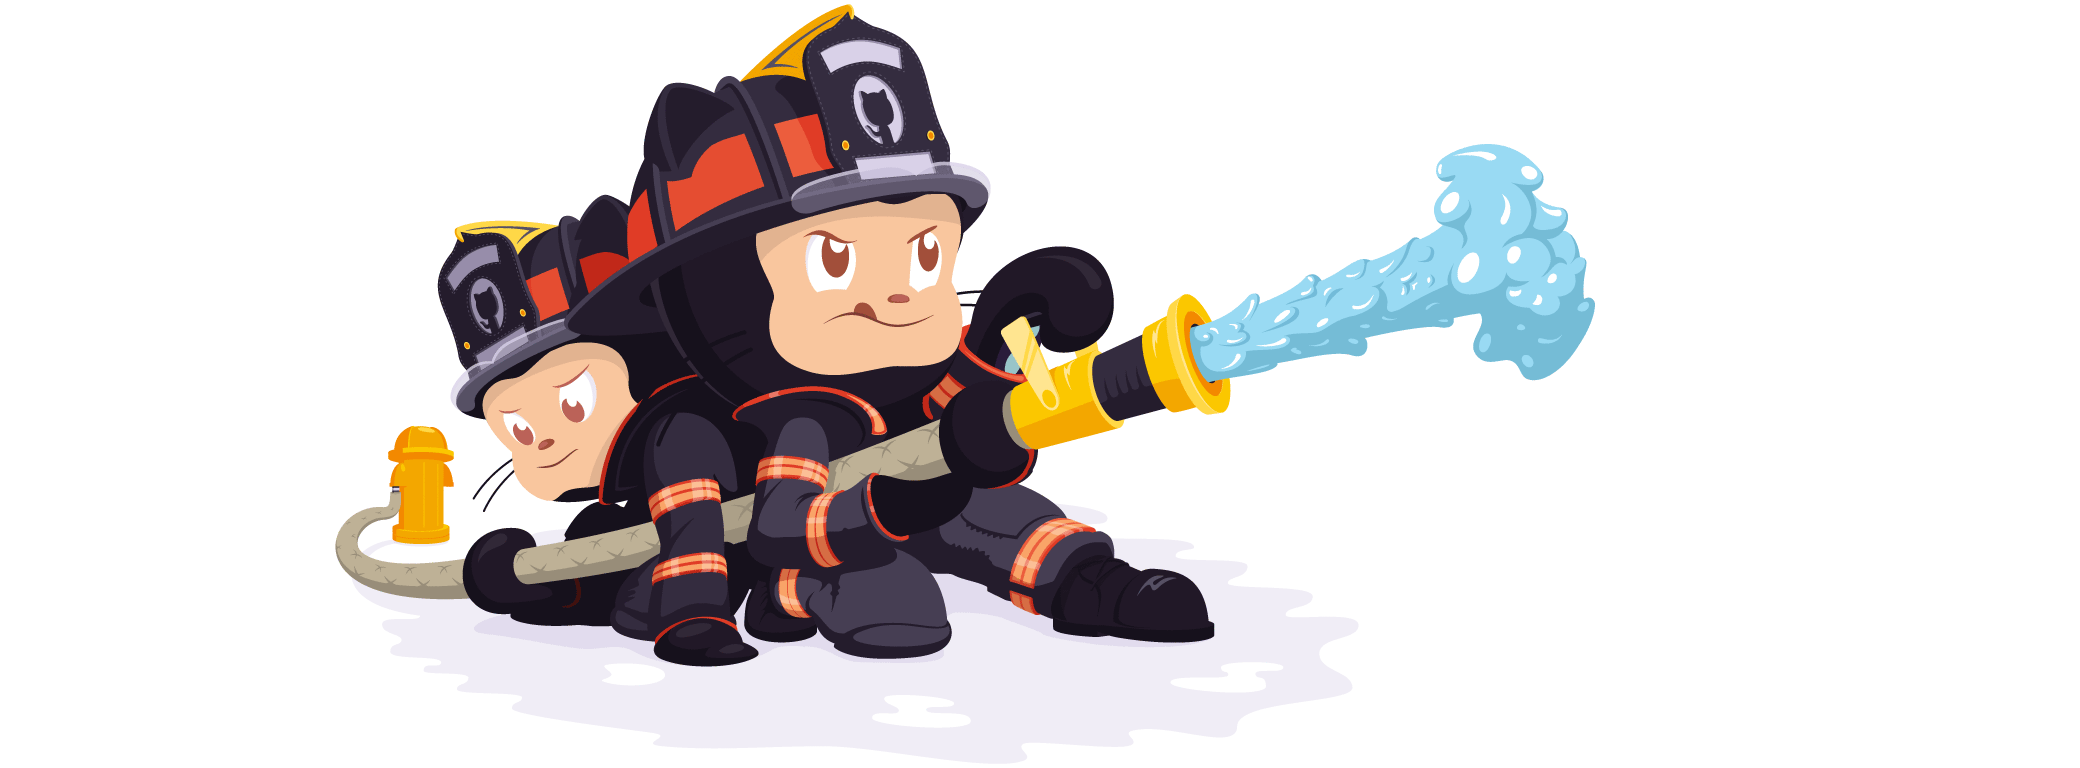 The Octocat in a firefighter uniform with a hose